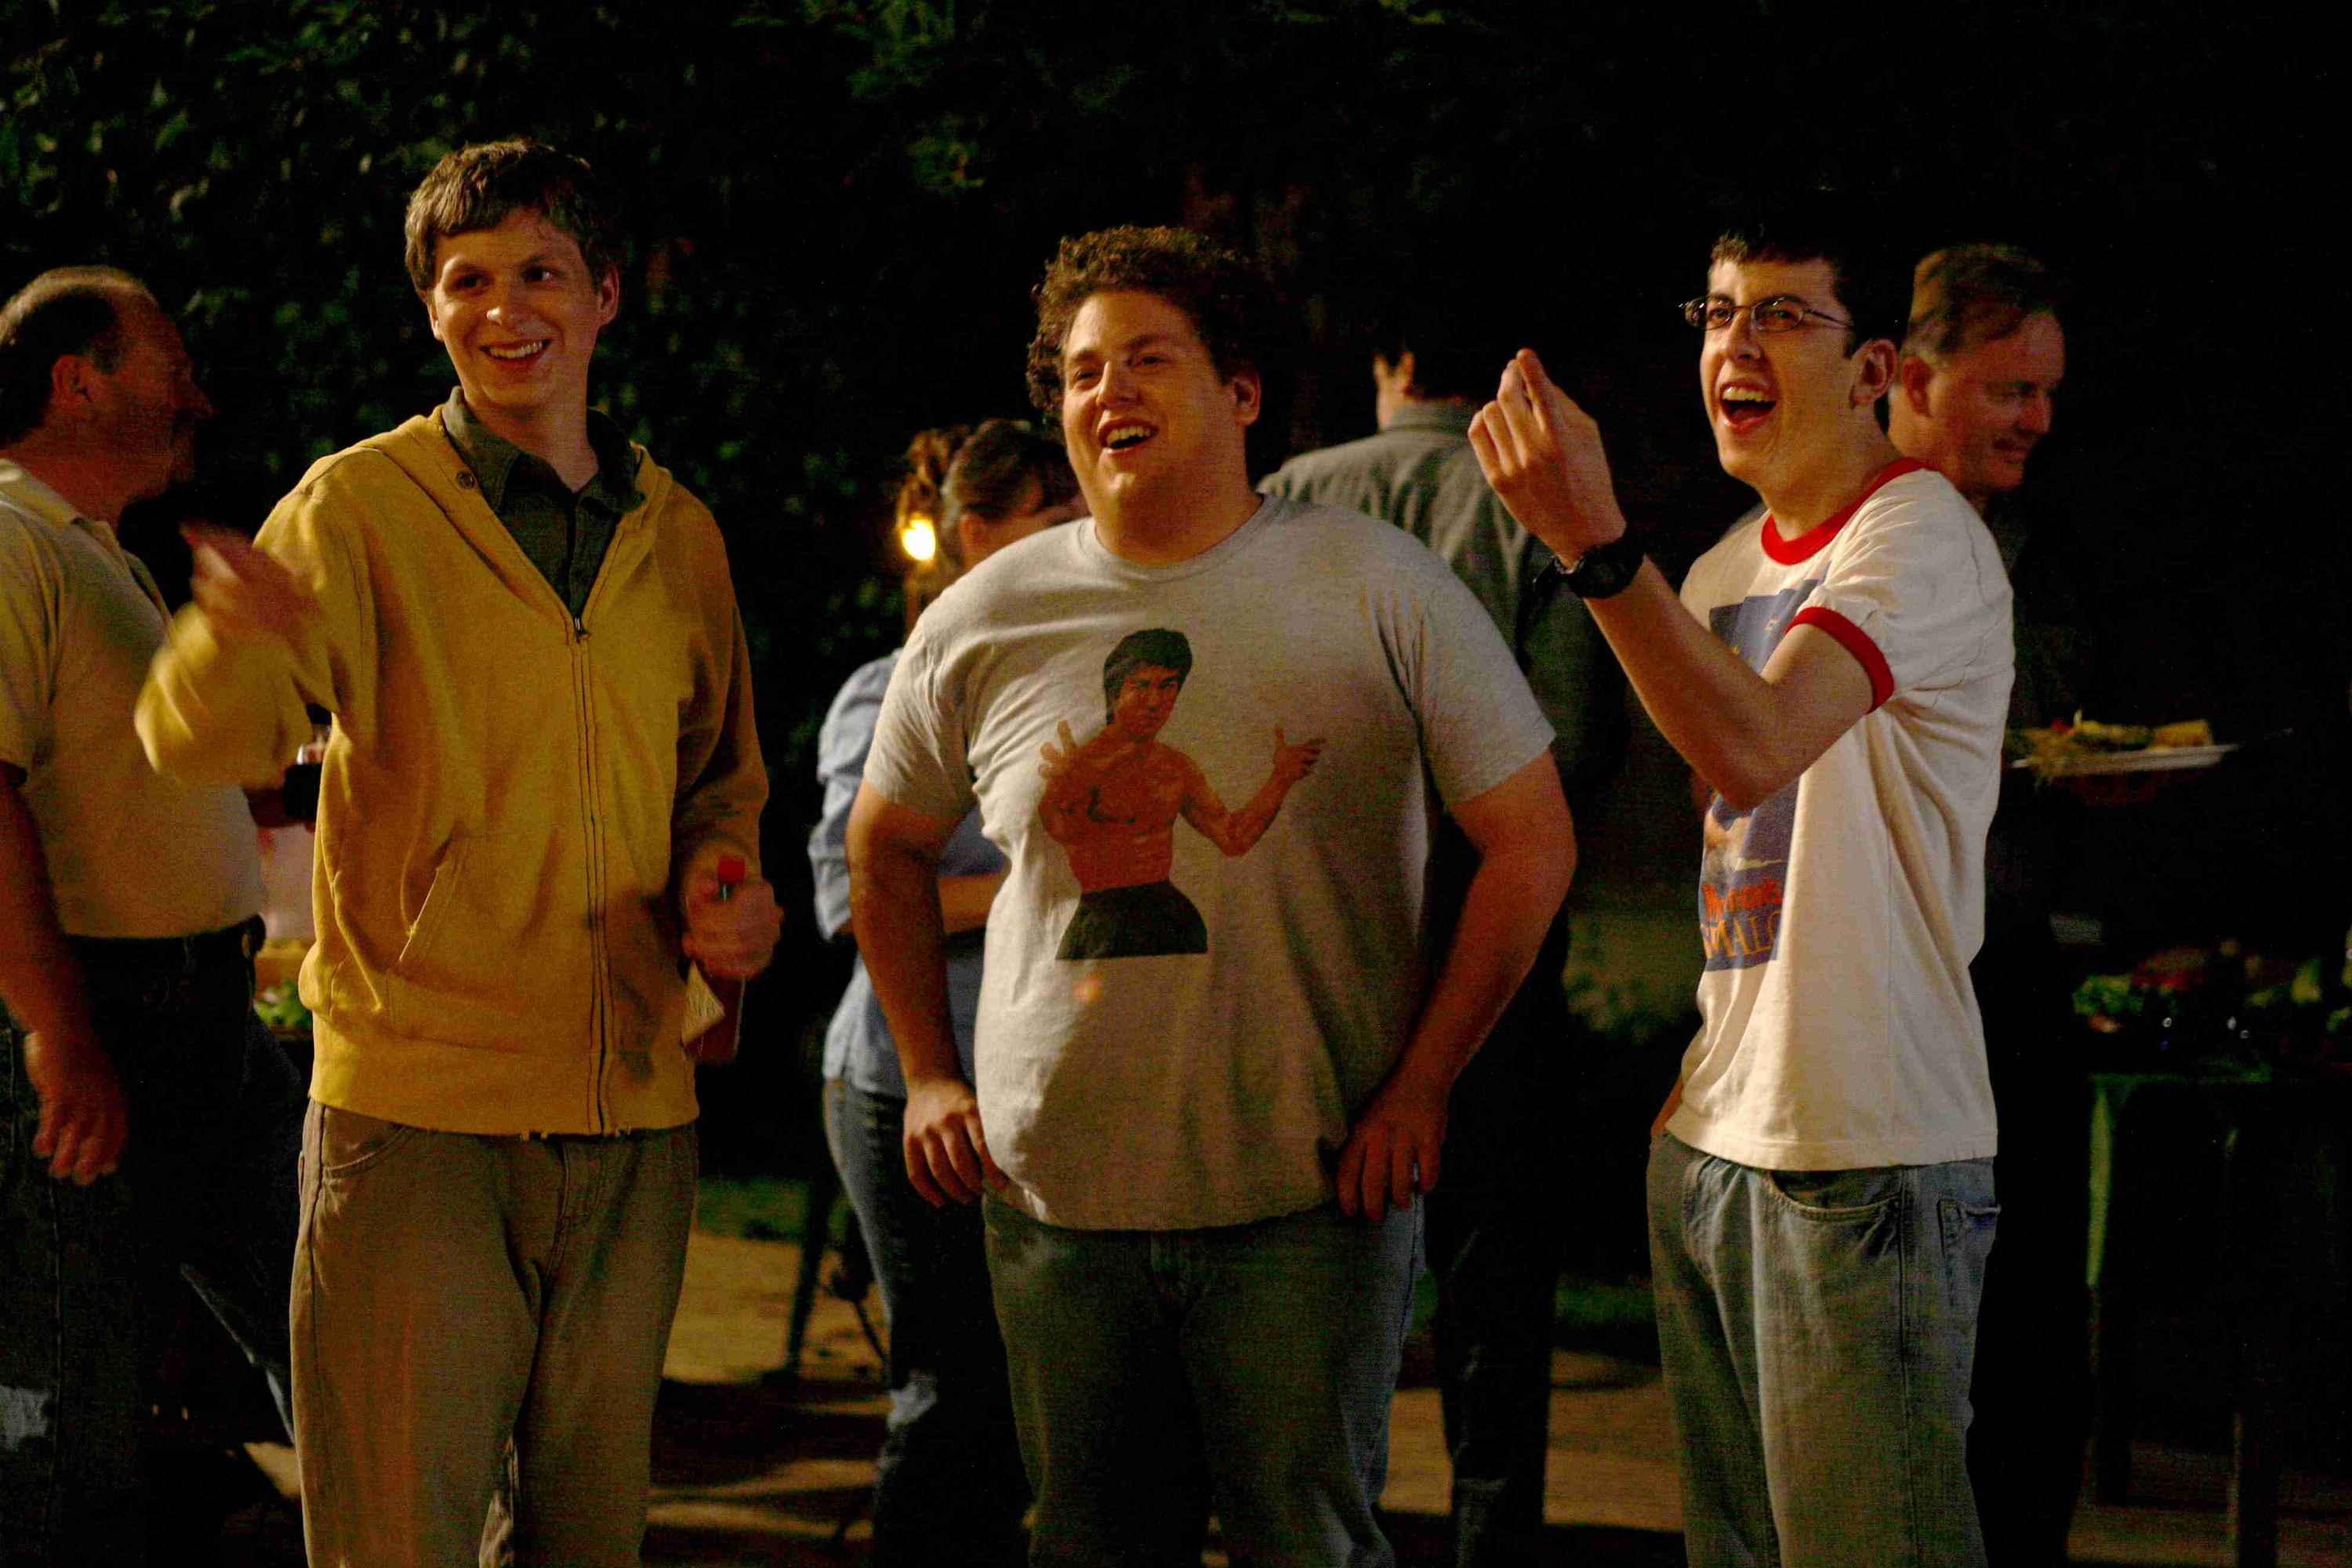 Does Superbad Hold Up After 10 Years?